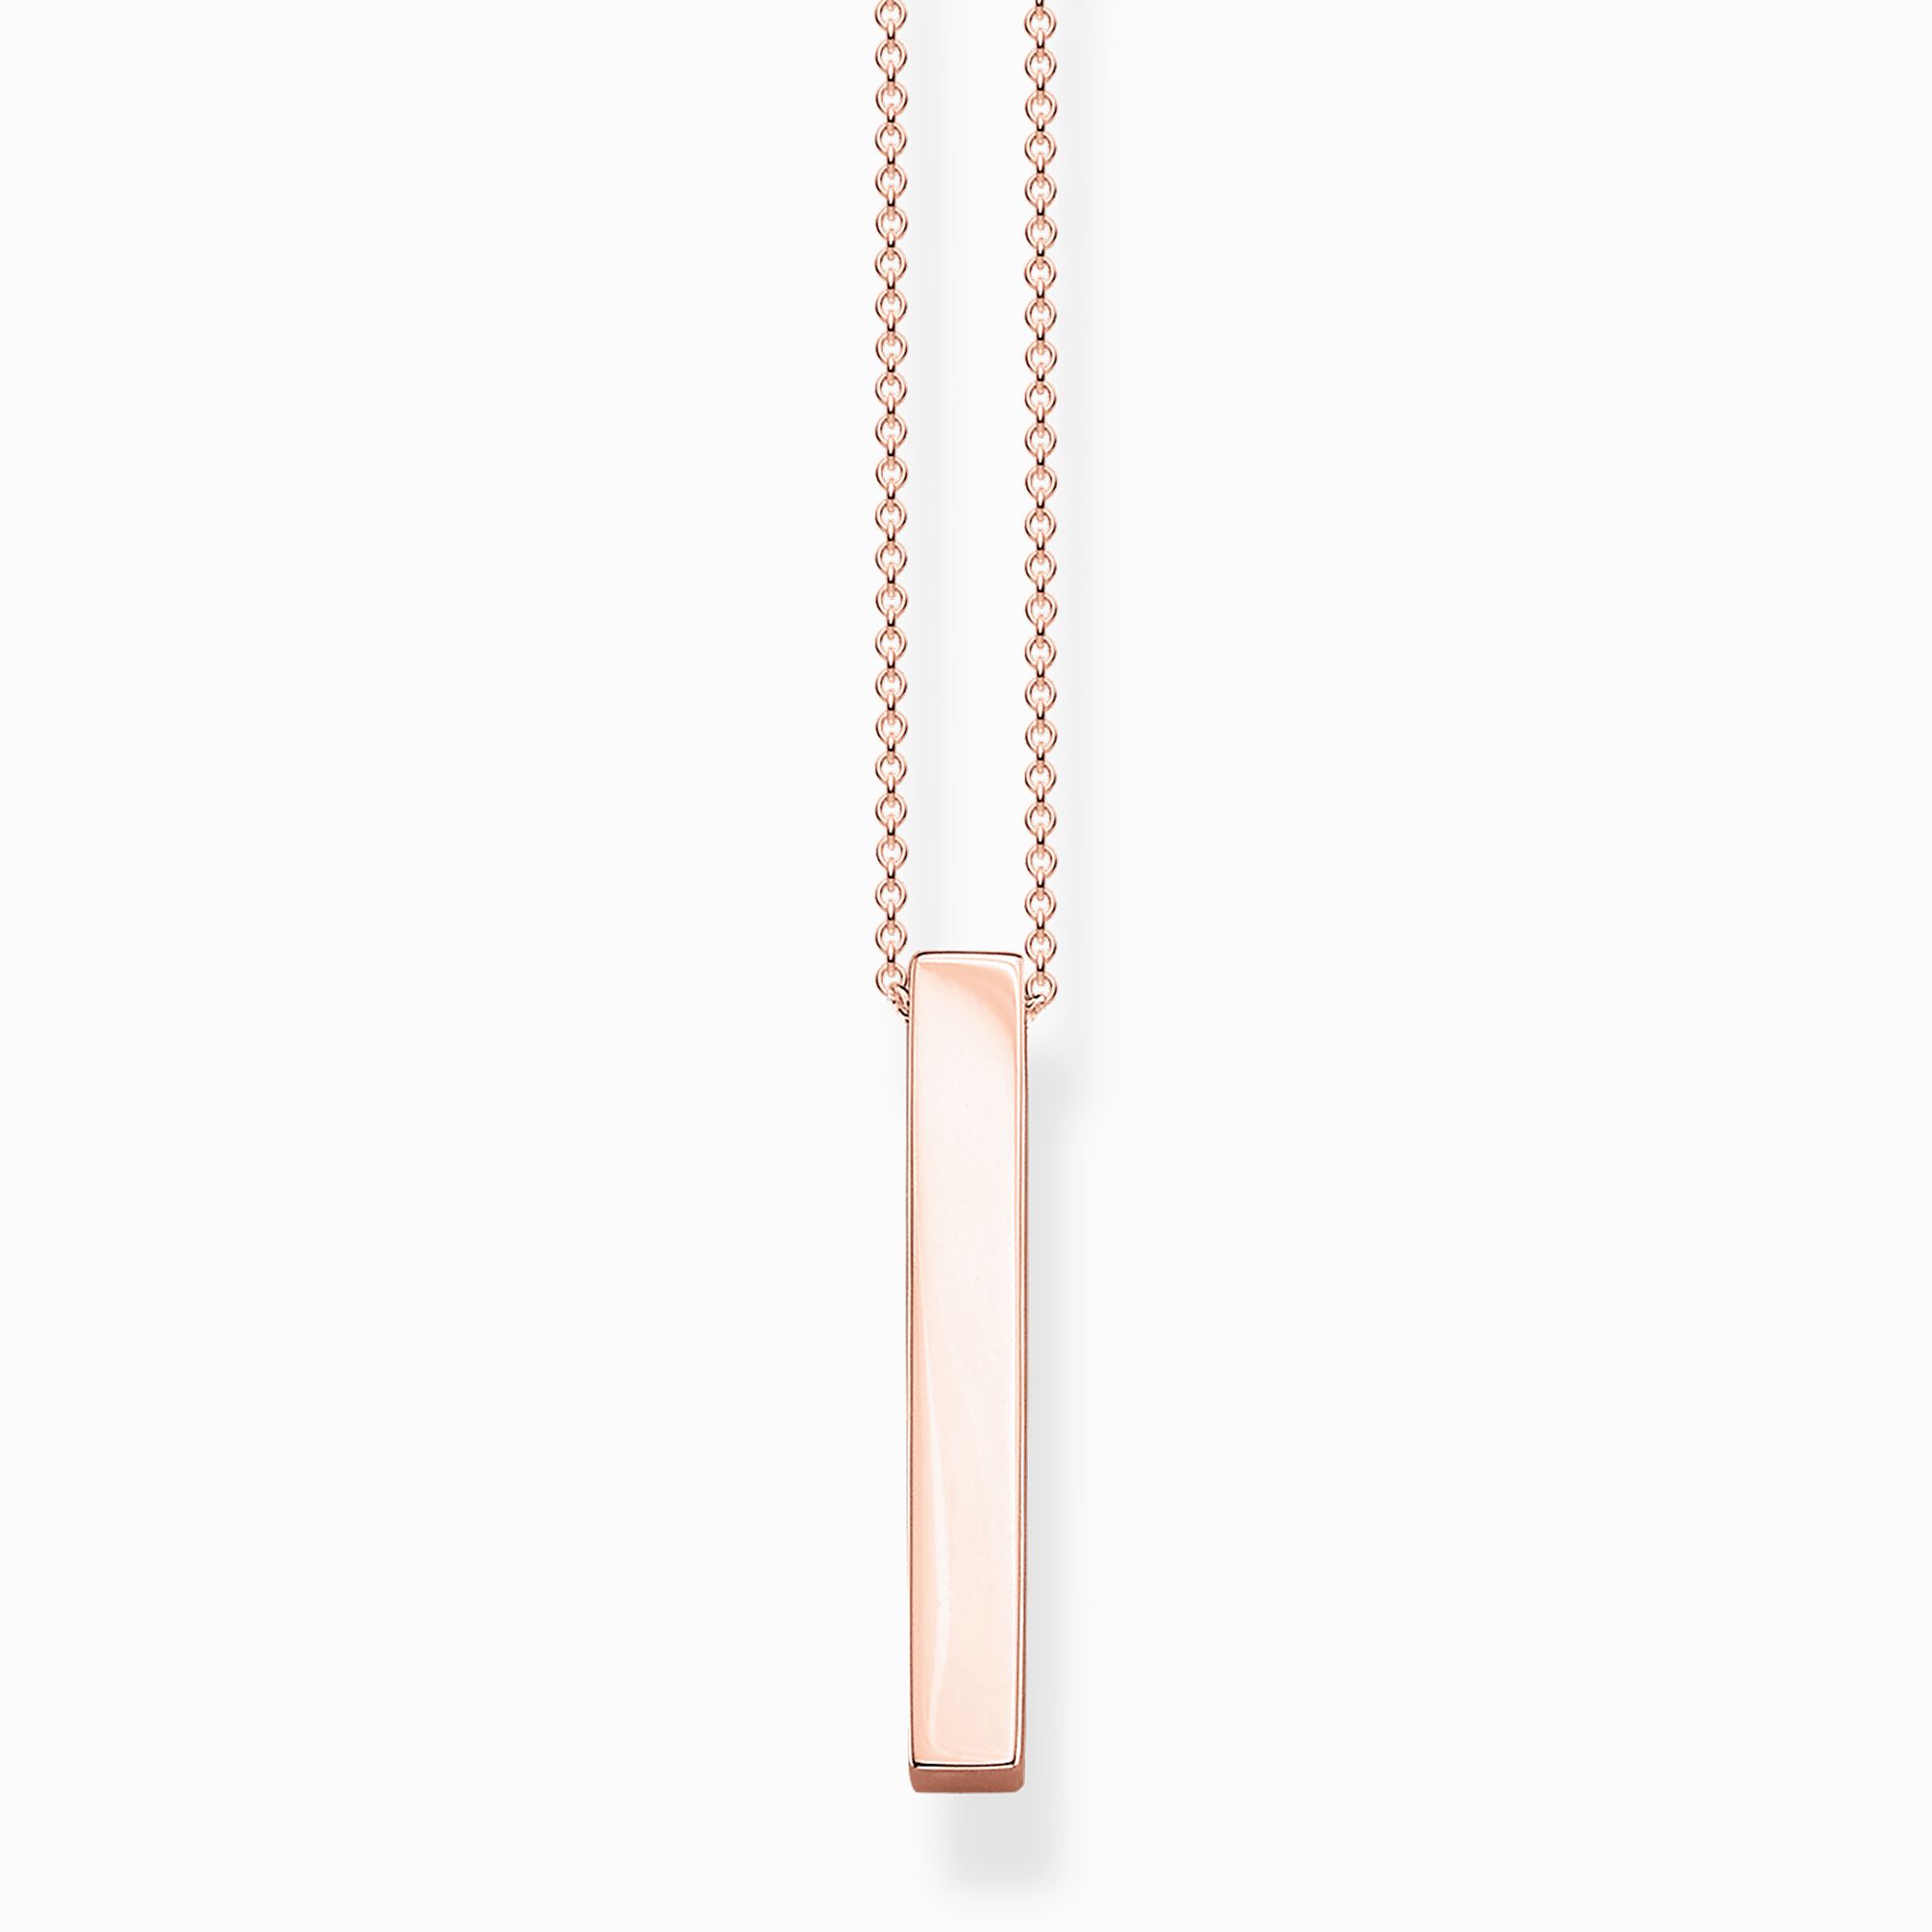 Necklace rose-gold cuboid from the  collection in the THOMAS SABO online store